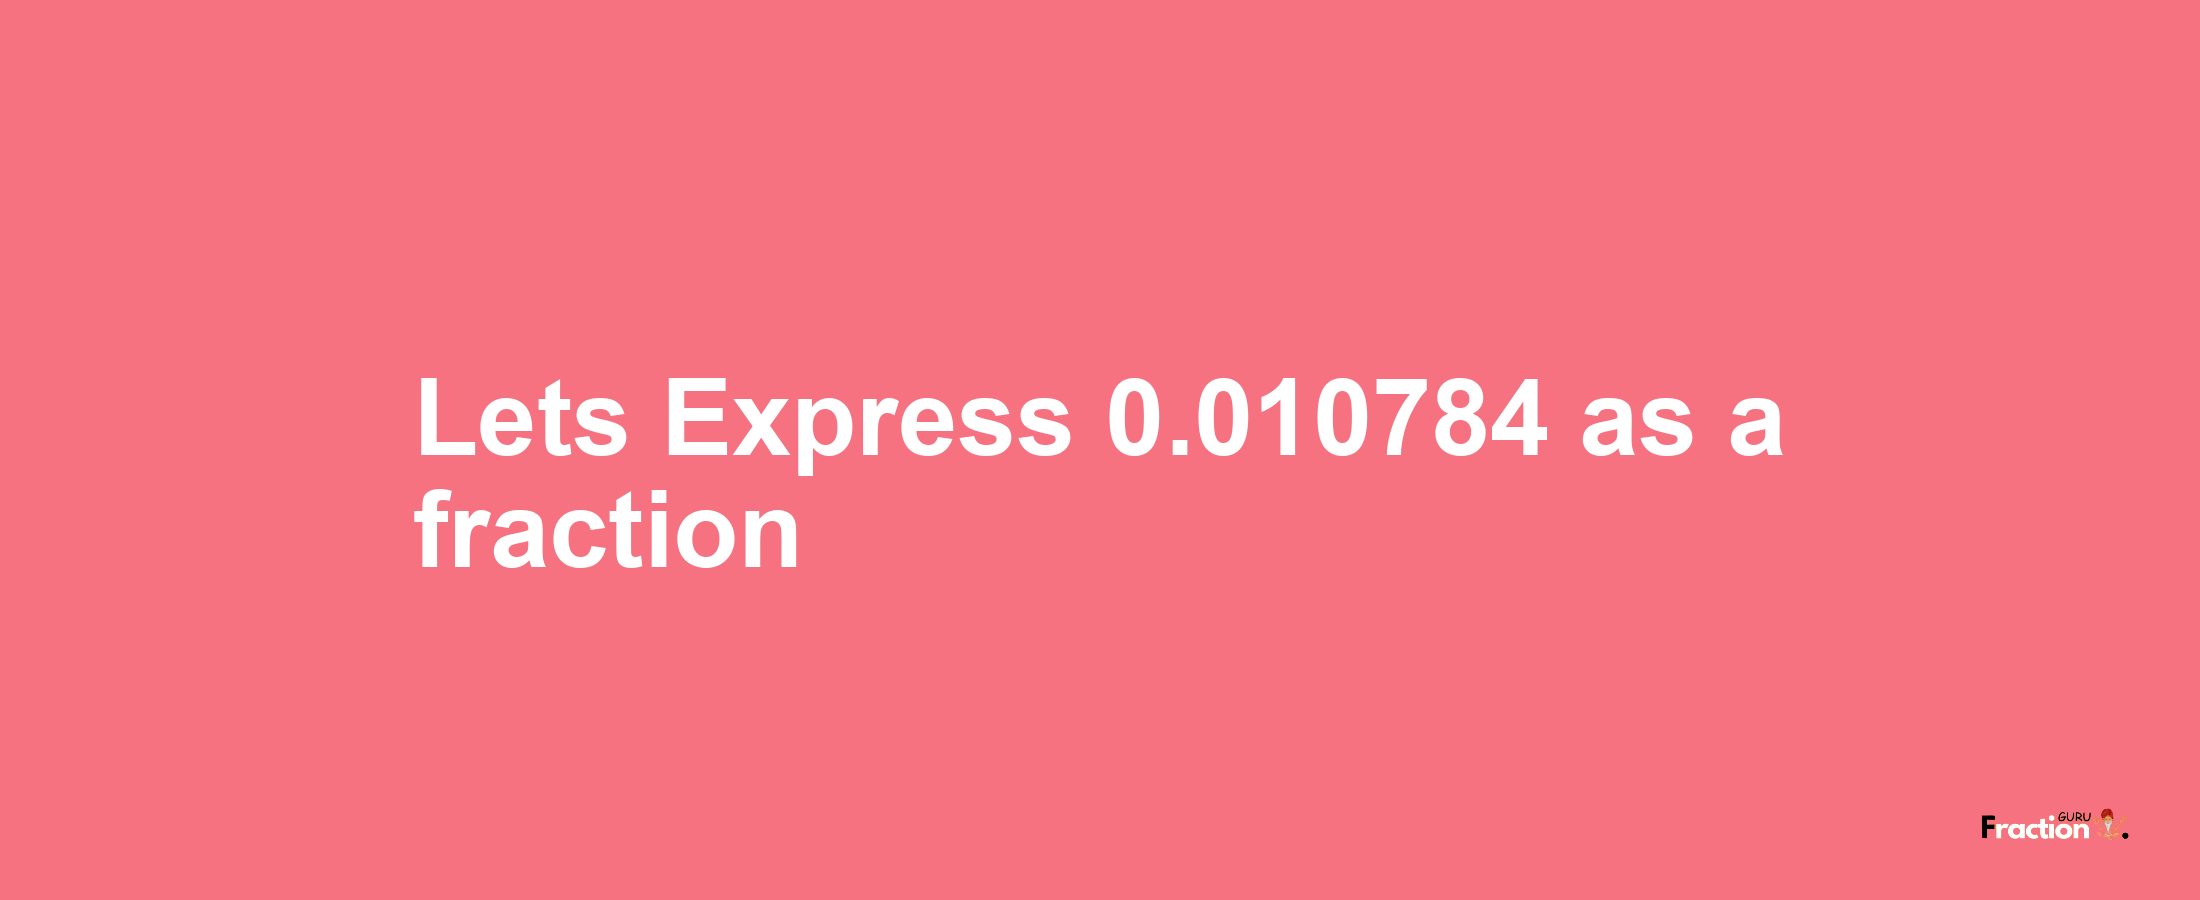 Lets Express 0.010784 as afraction